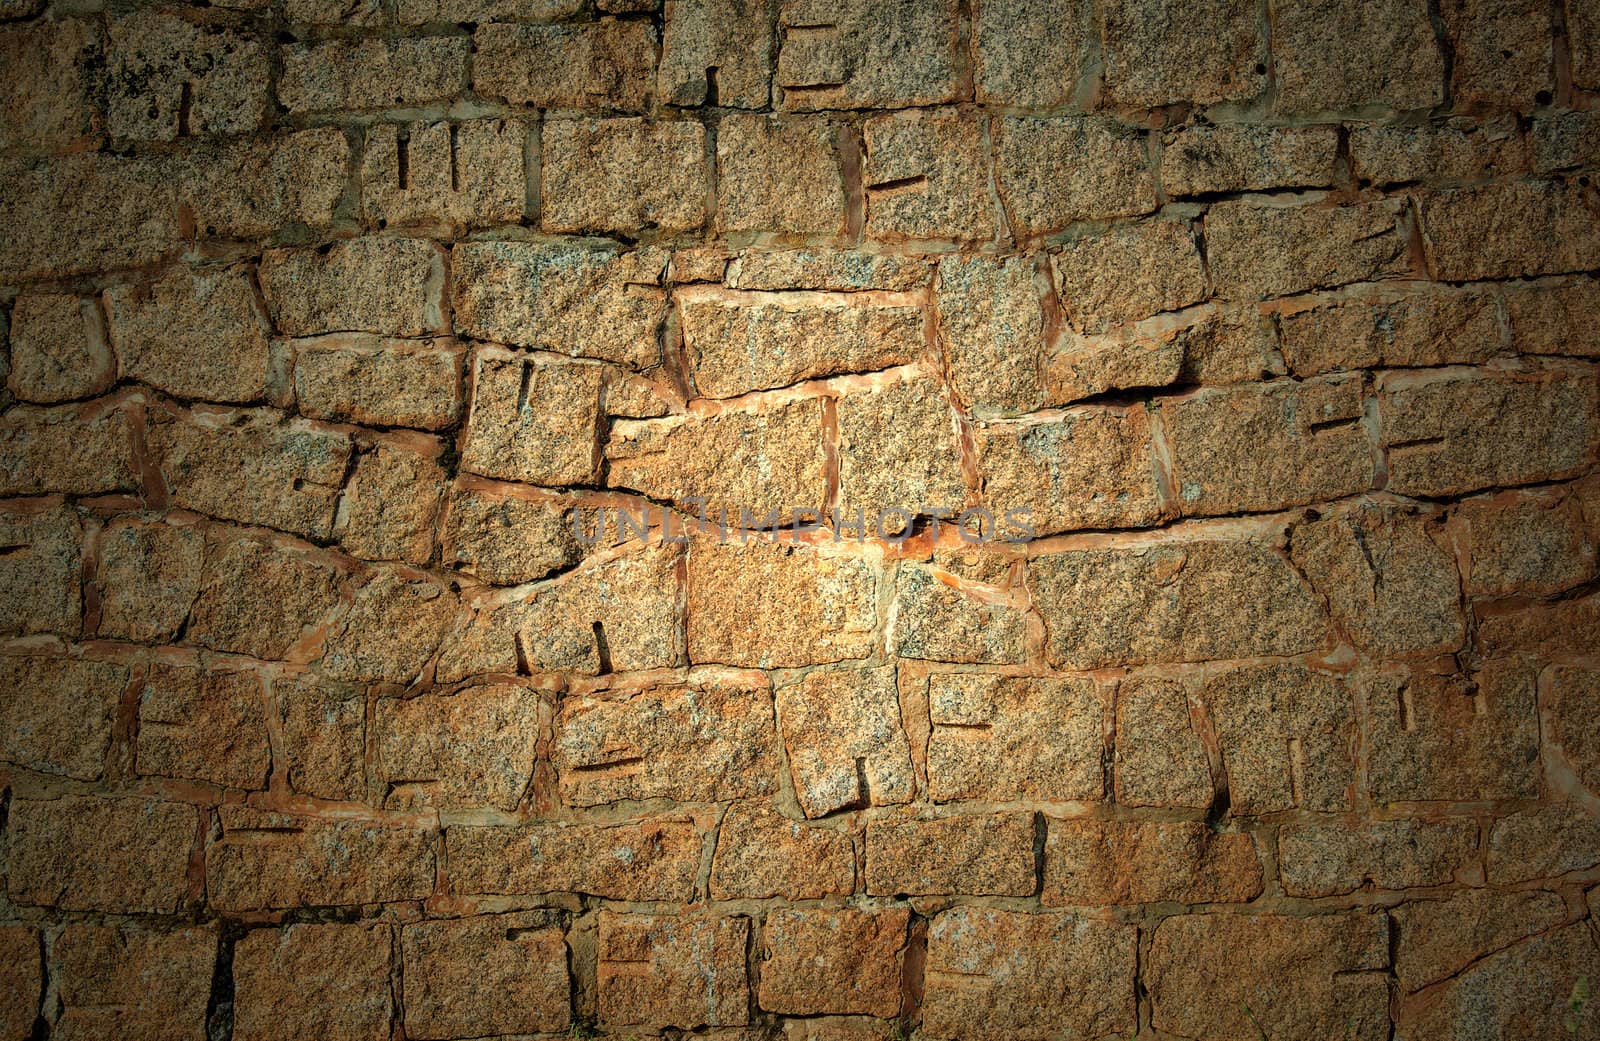 background image of an old stone or rock wall